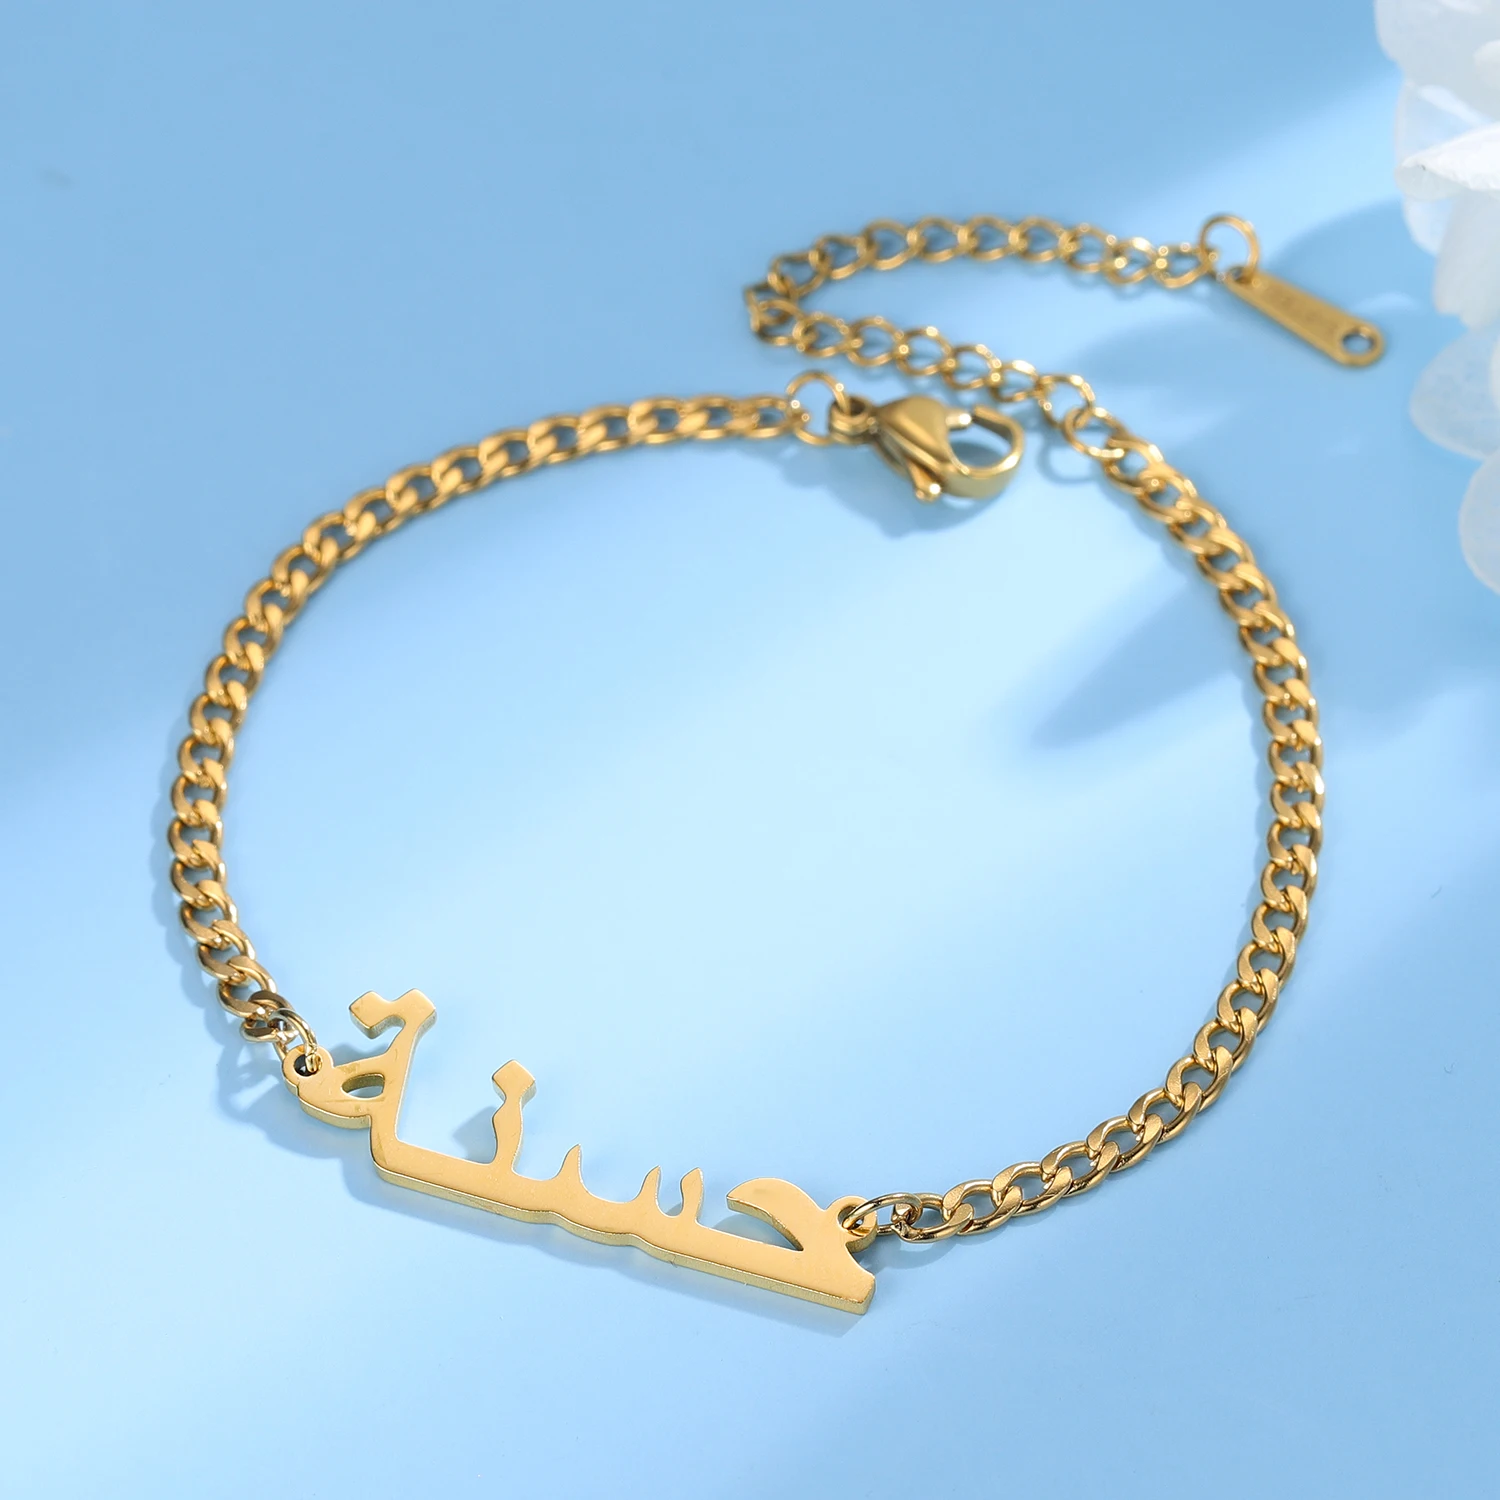 Customized Arabic Name Bracelet For Women Personalized Gold Stainless Steel Bangle Cuban Chain Letter Bracelet Jewelry Gift BFF